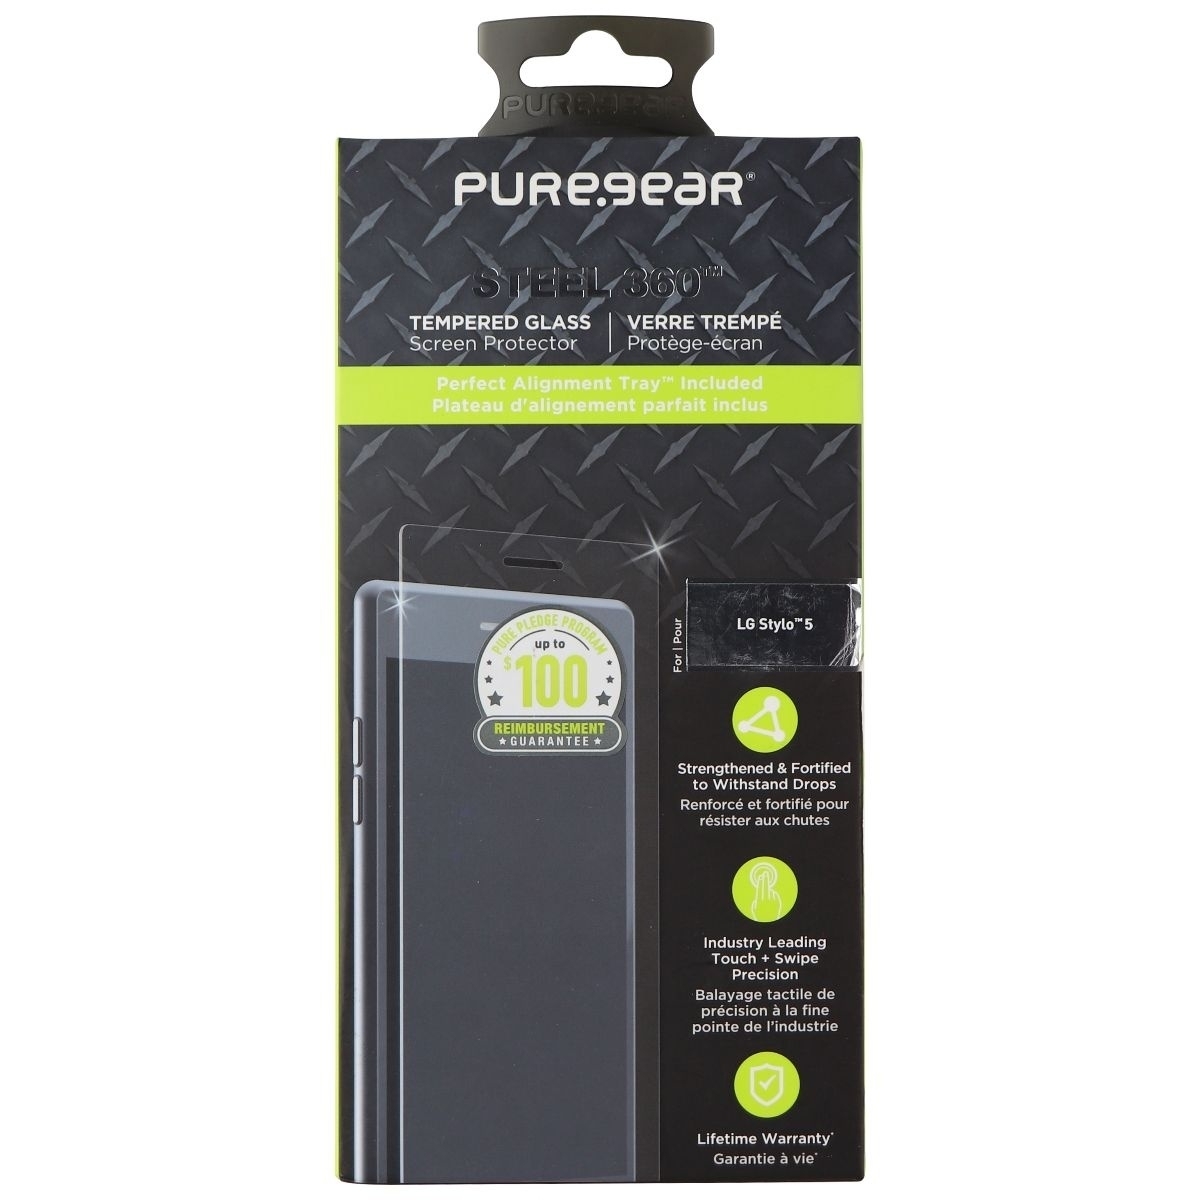 PureGear Steel 360 Tempered Glass For LG Stylo 5 Smartphones - Clear